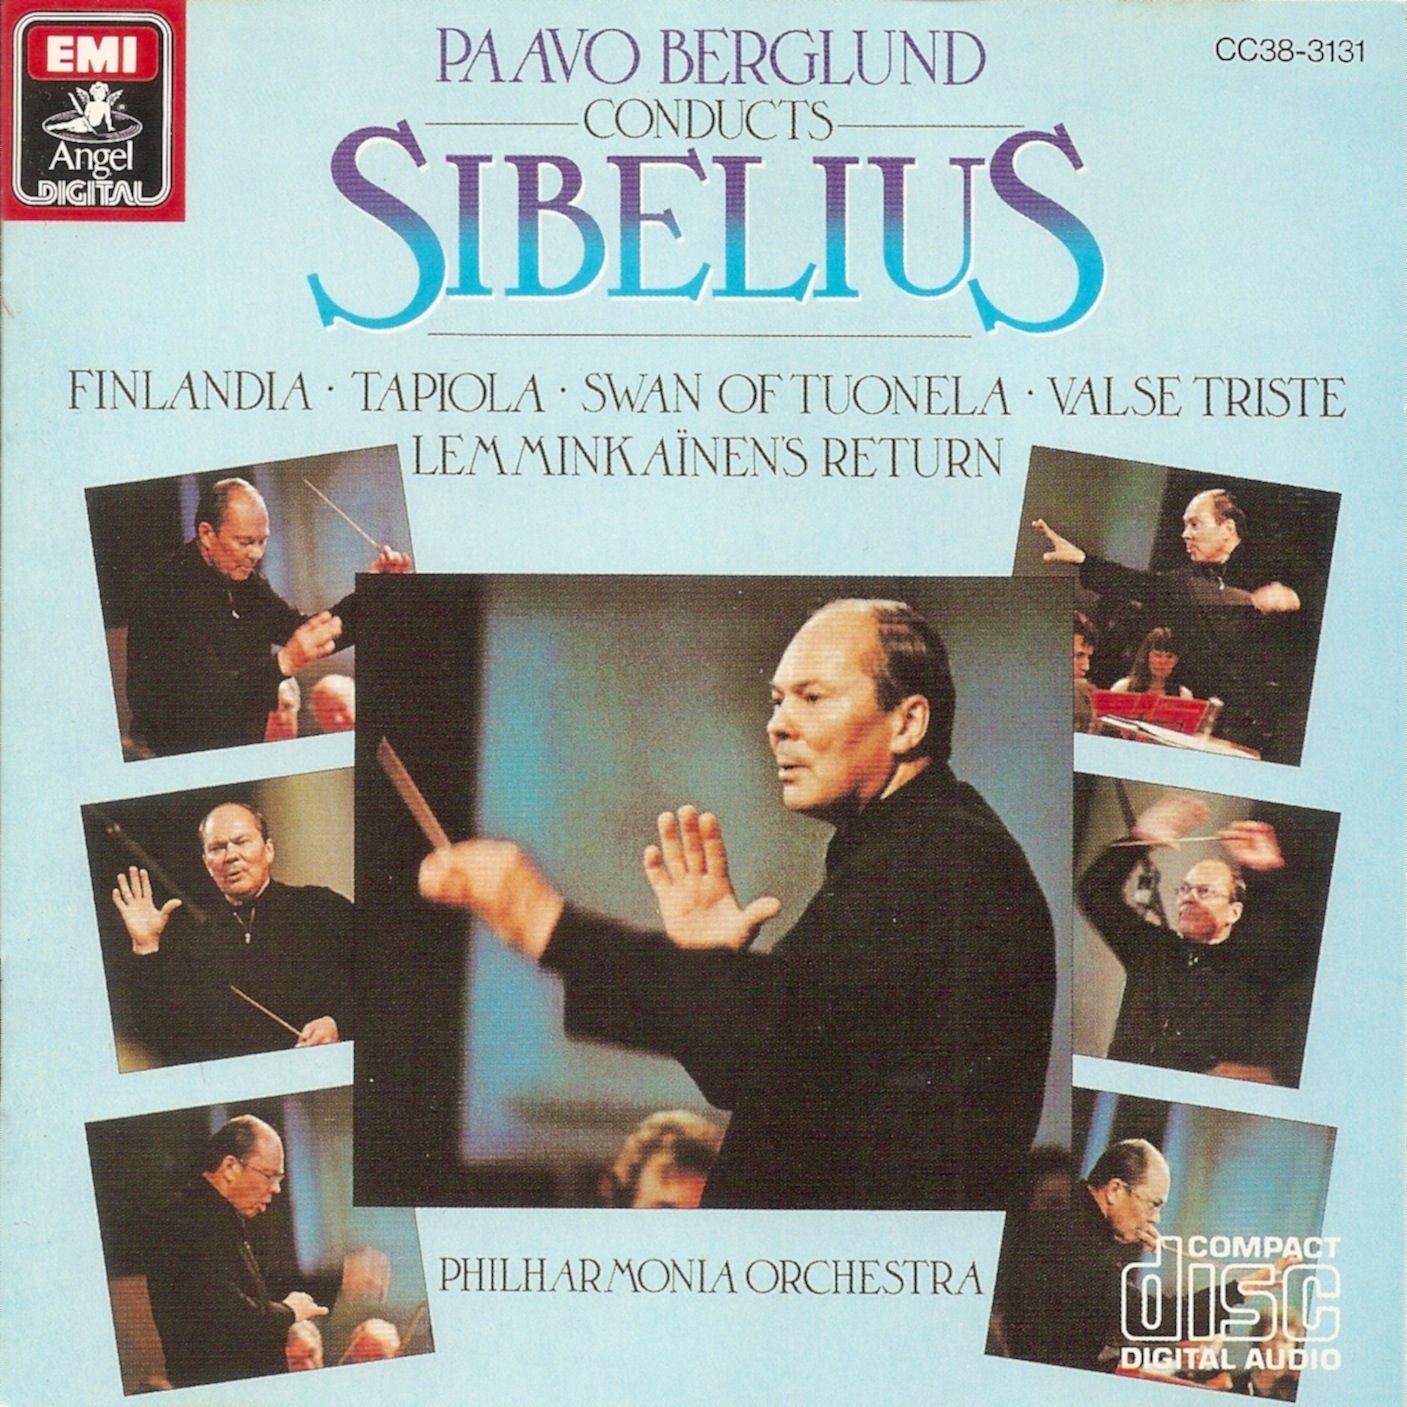 The First Pressing CD Collection: Jean Sibelius - Finlandia